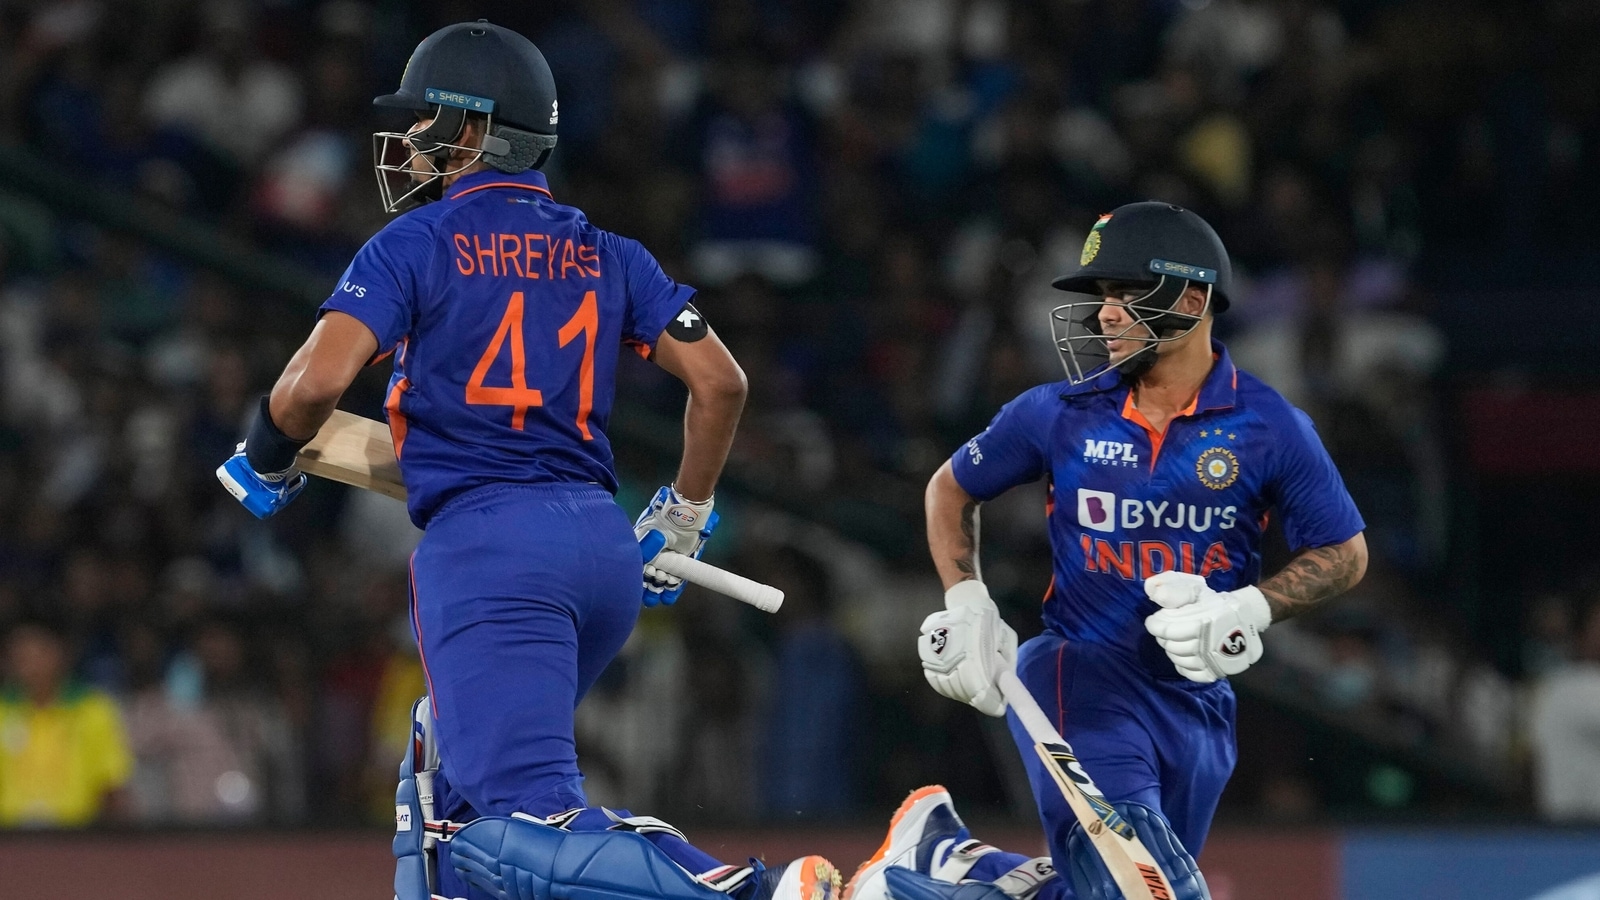 Ishan Kishan, Shreyas Iyer have only themselves to blame; BCCI cracks the whip, opts for discipline over status